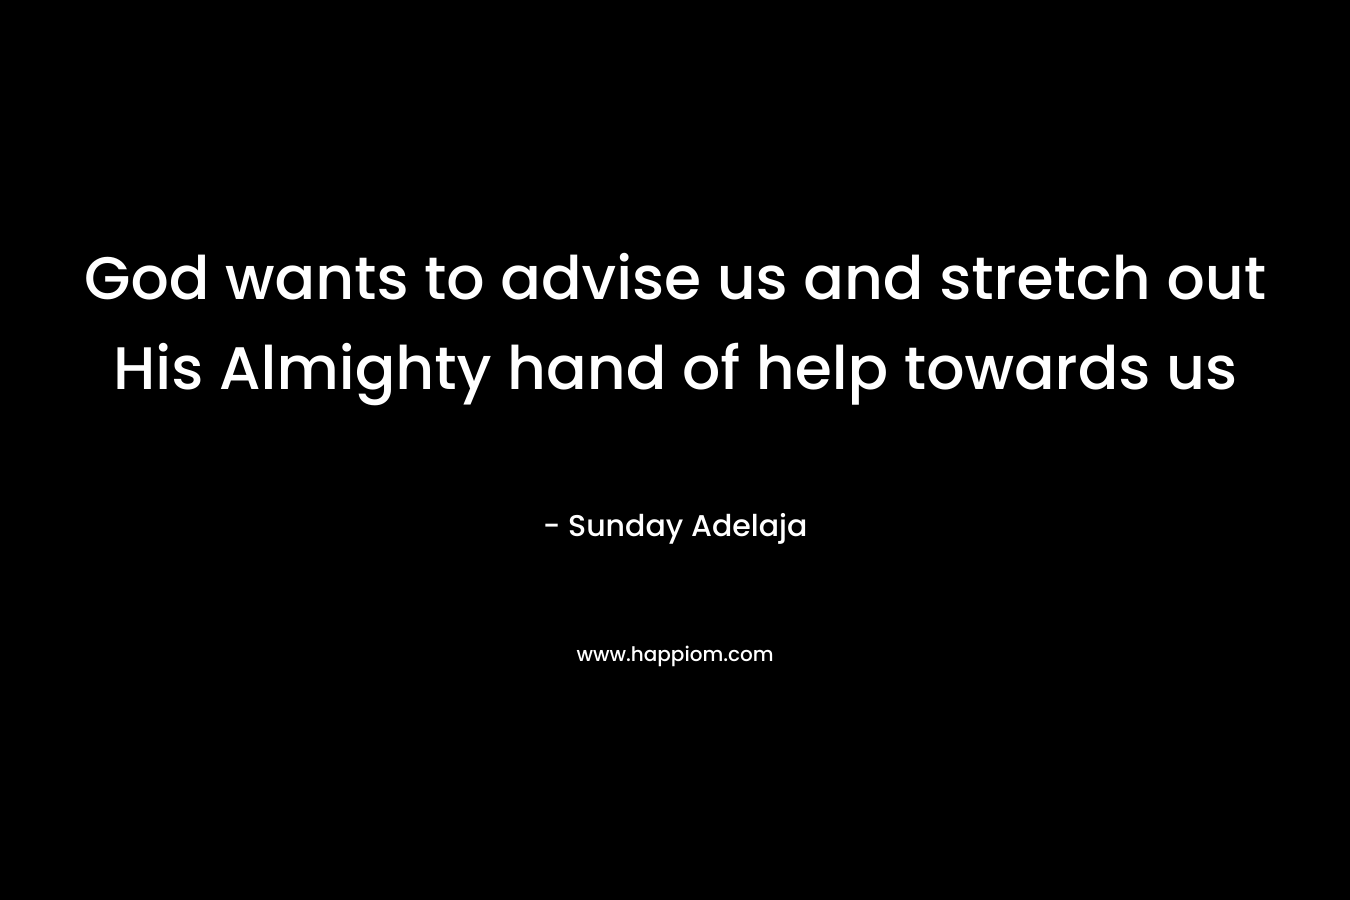 God wants to advise us and stretch out His Almighty hand of help towards us